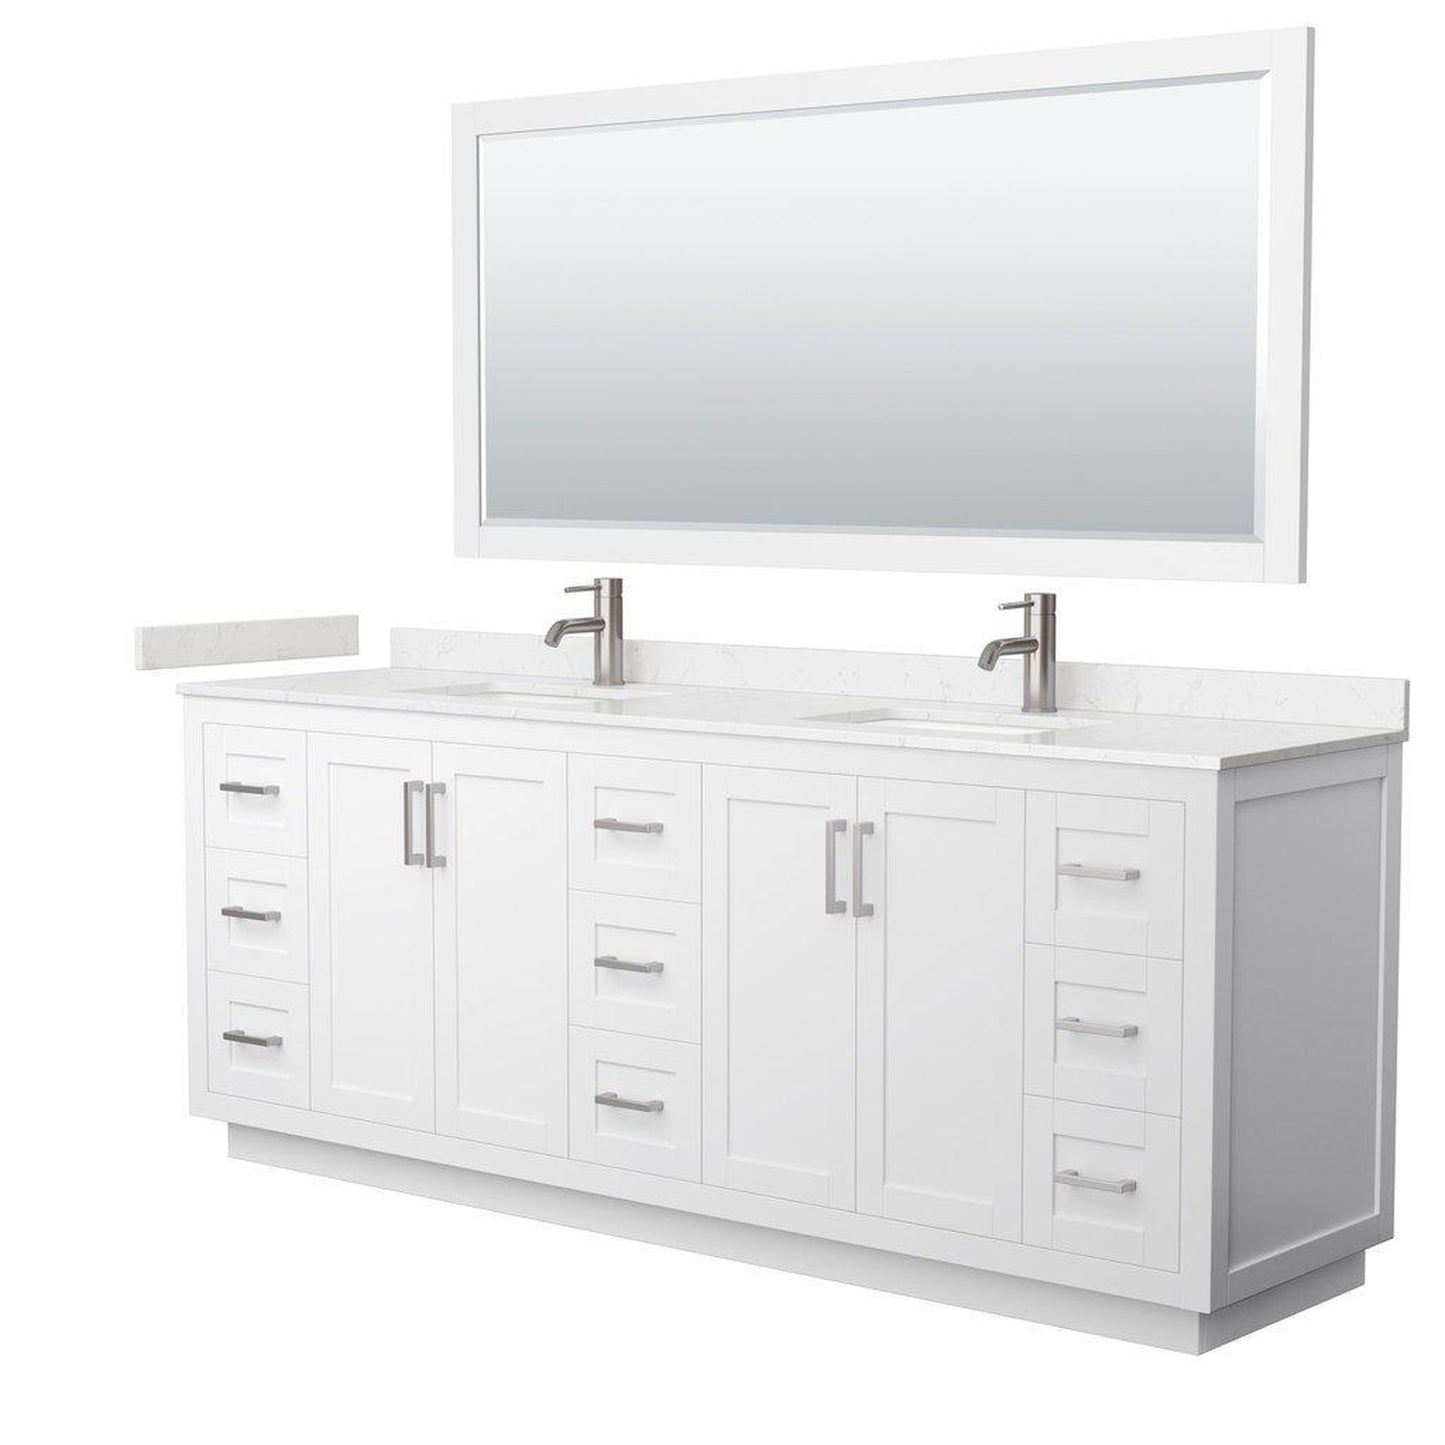 Wyndham Collection Miranda 84" Double Bathroom White Vanity Set With Light-Vein Carrara Cultured Marble Countertop, Undermount Square Sink, 70" Mirror And Brushed Nickel Trim